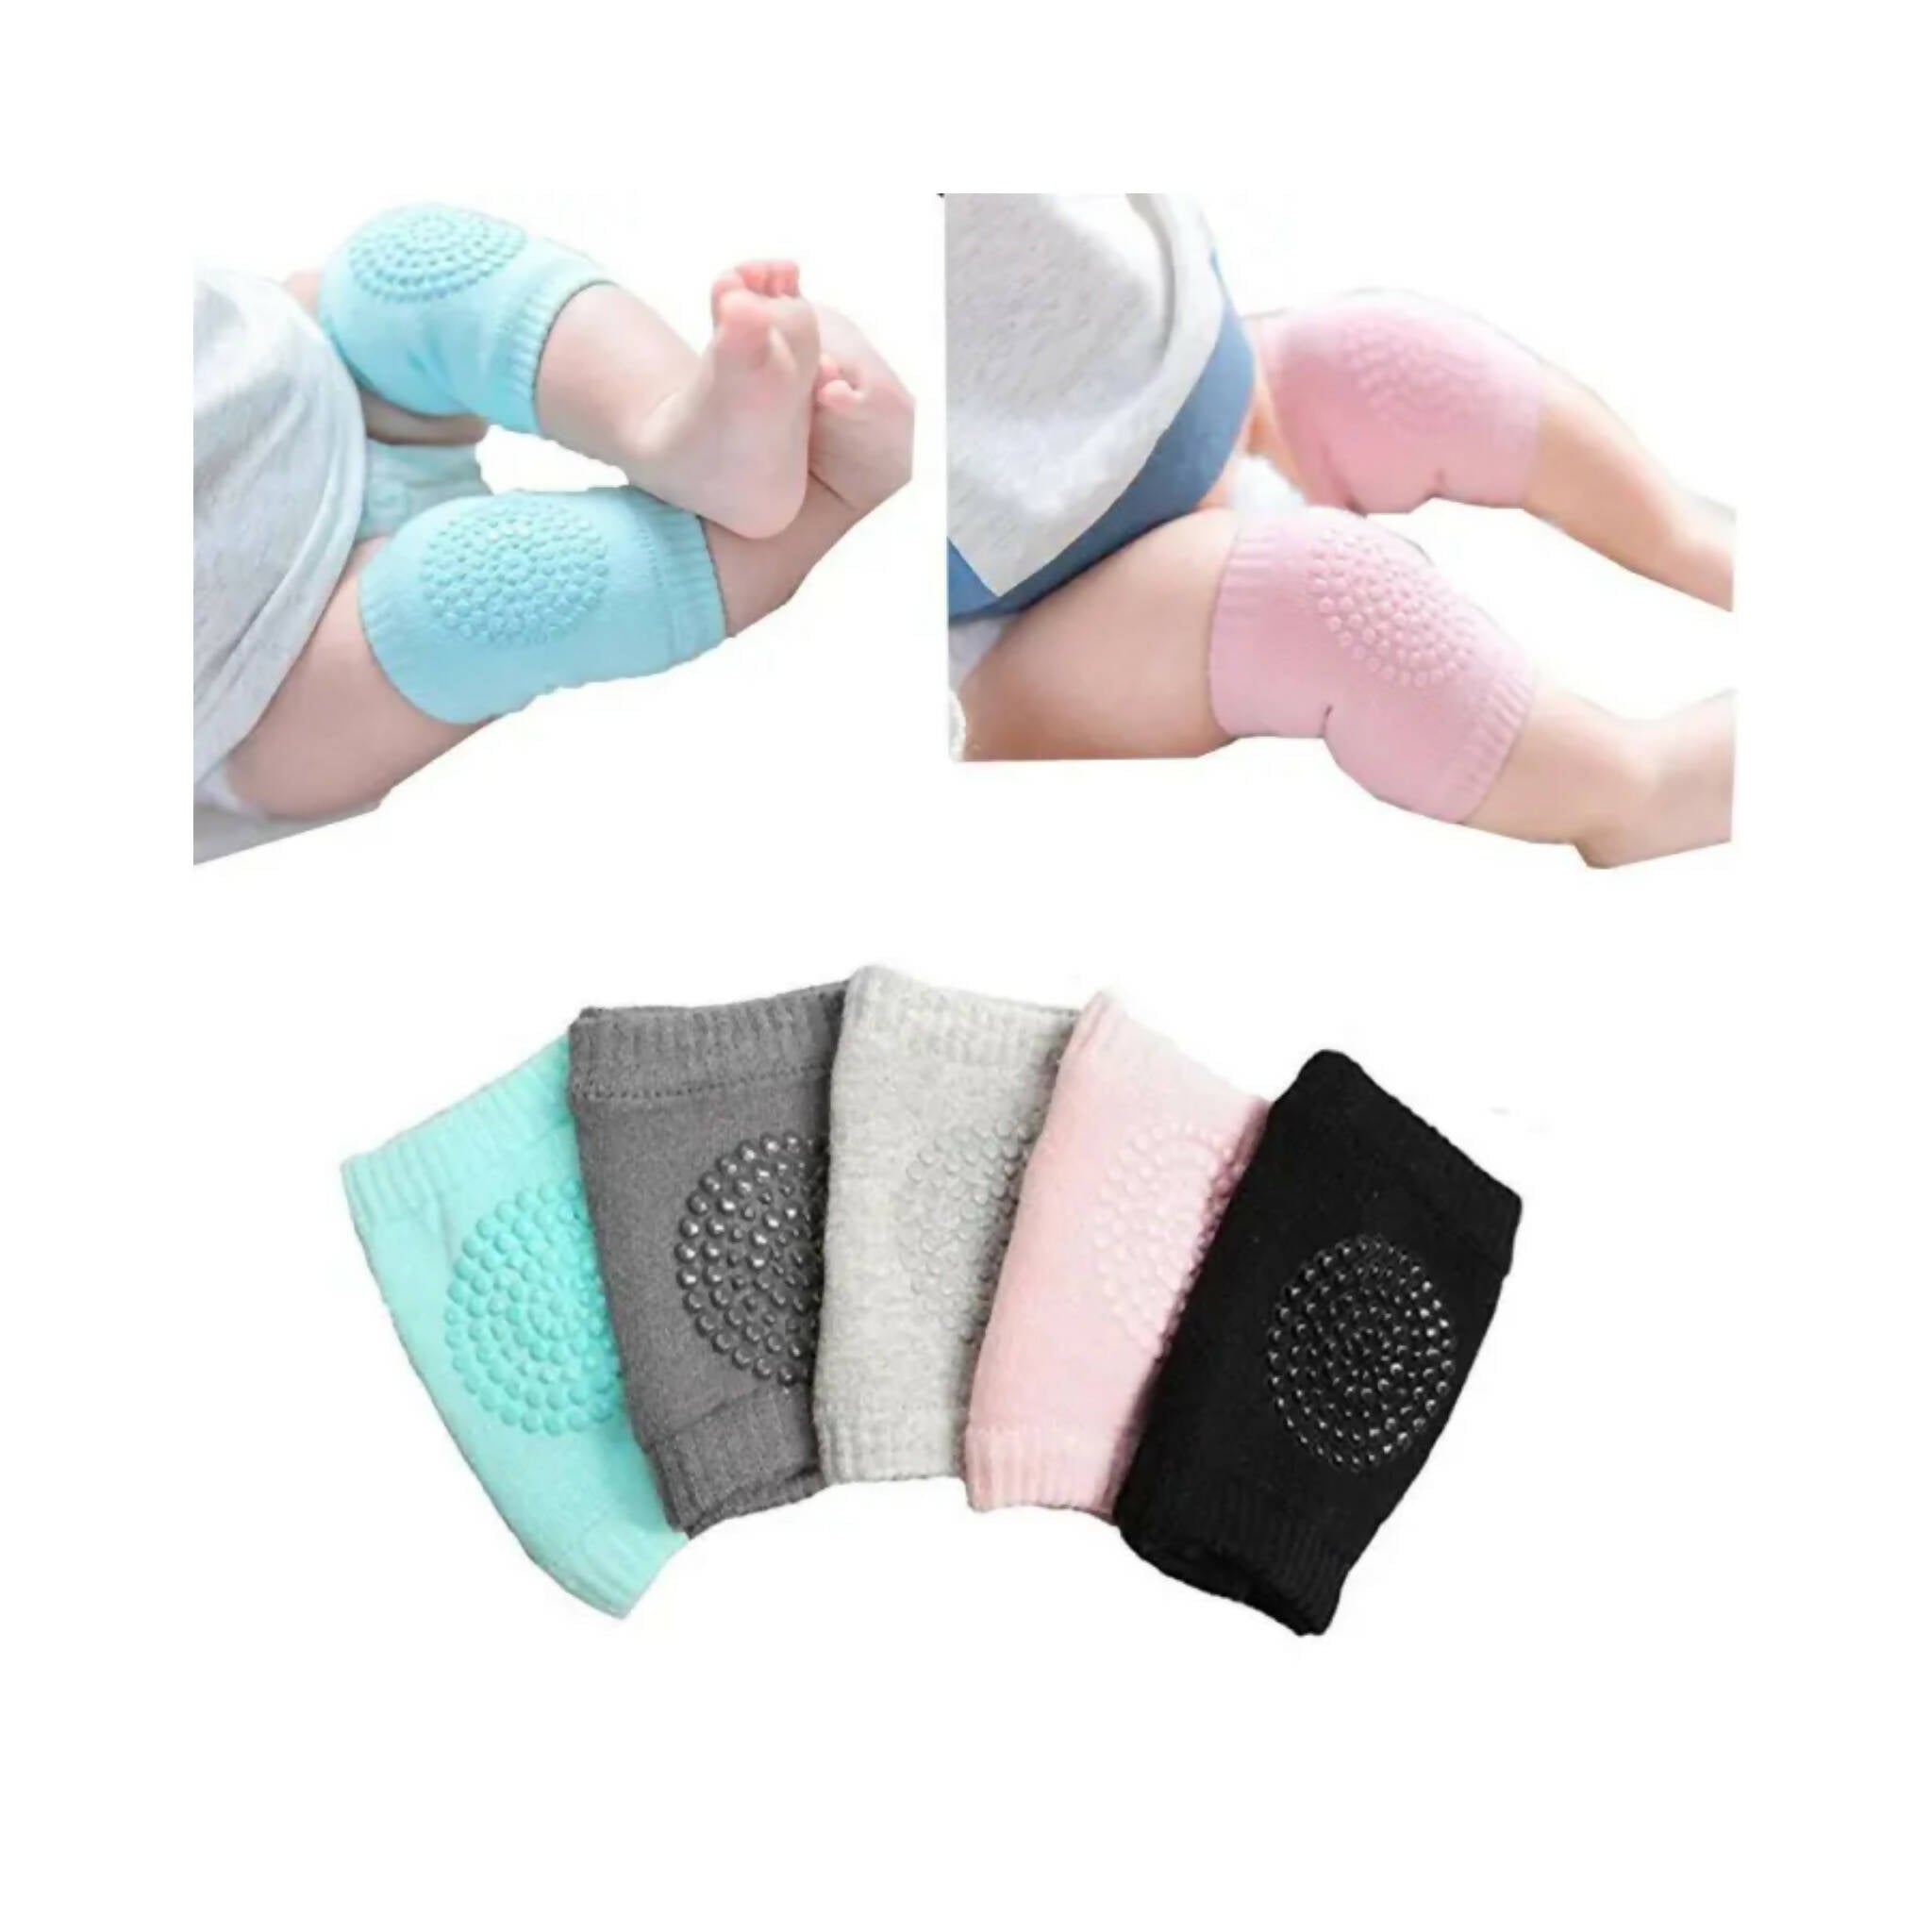 Knee Pads, Adjustable, for Baby's Crawling Safety